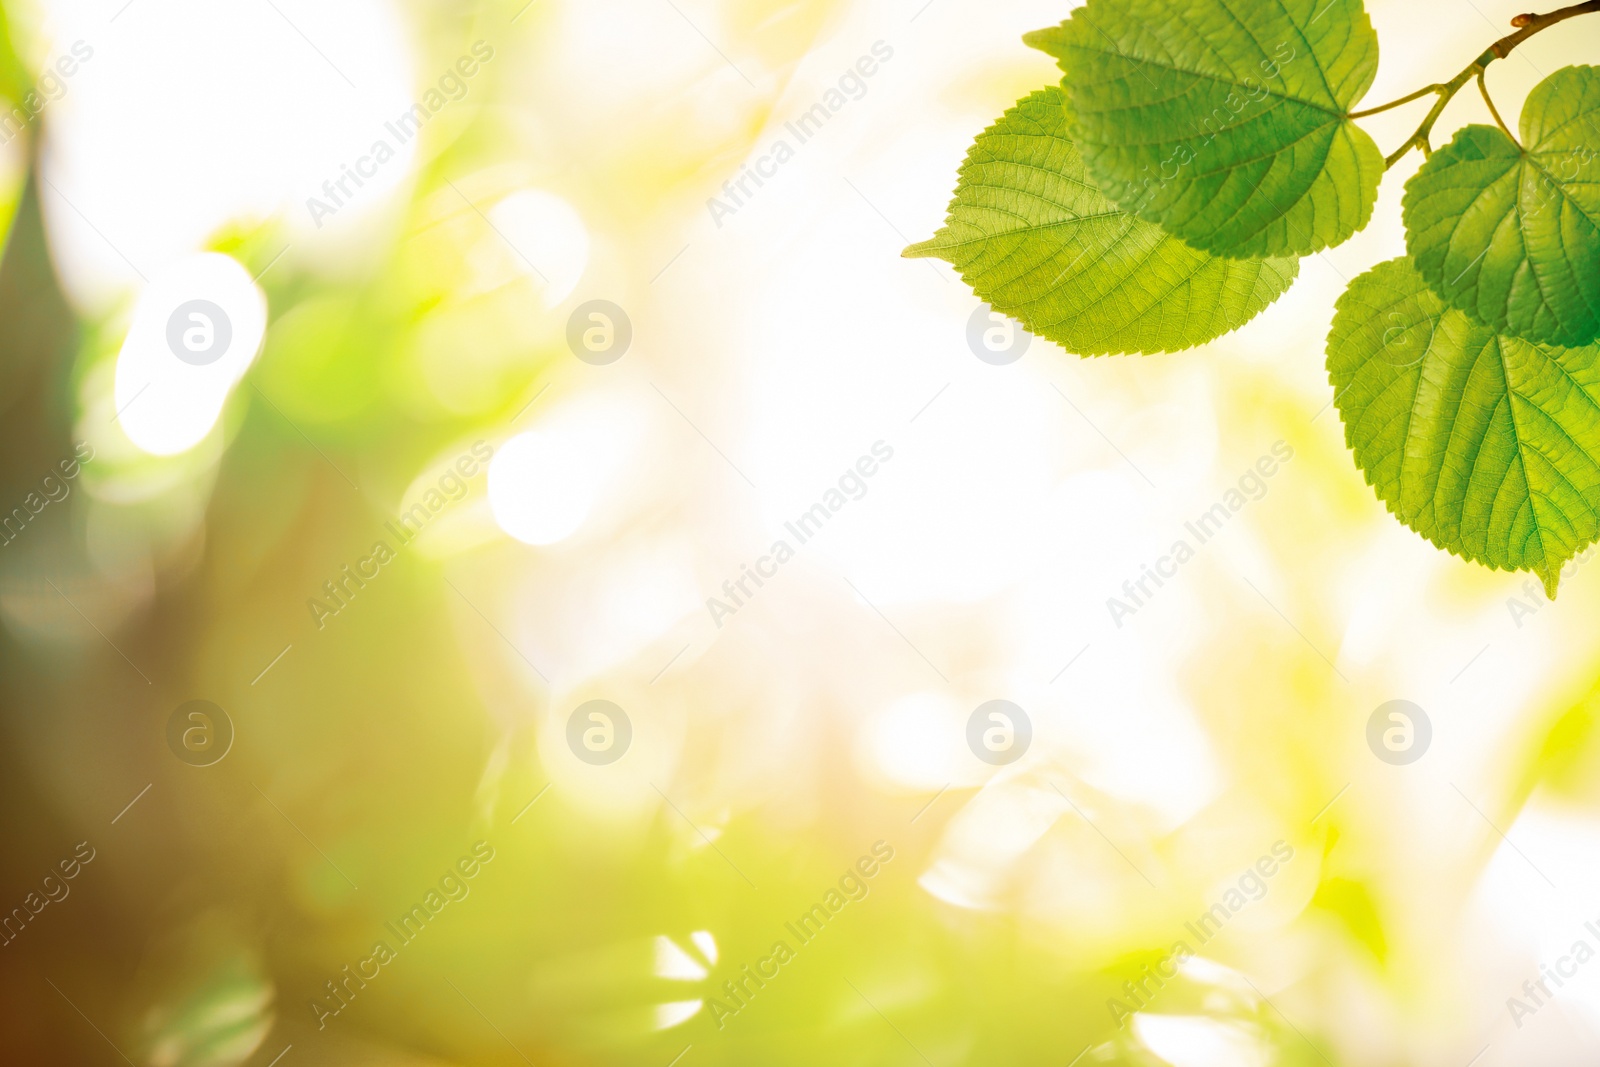 Image of Tree branch with green leaves on sunny day